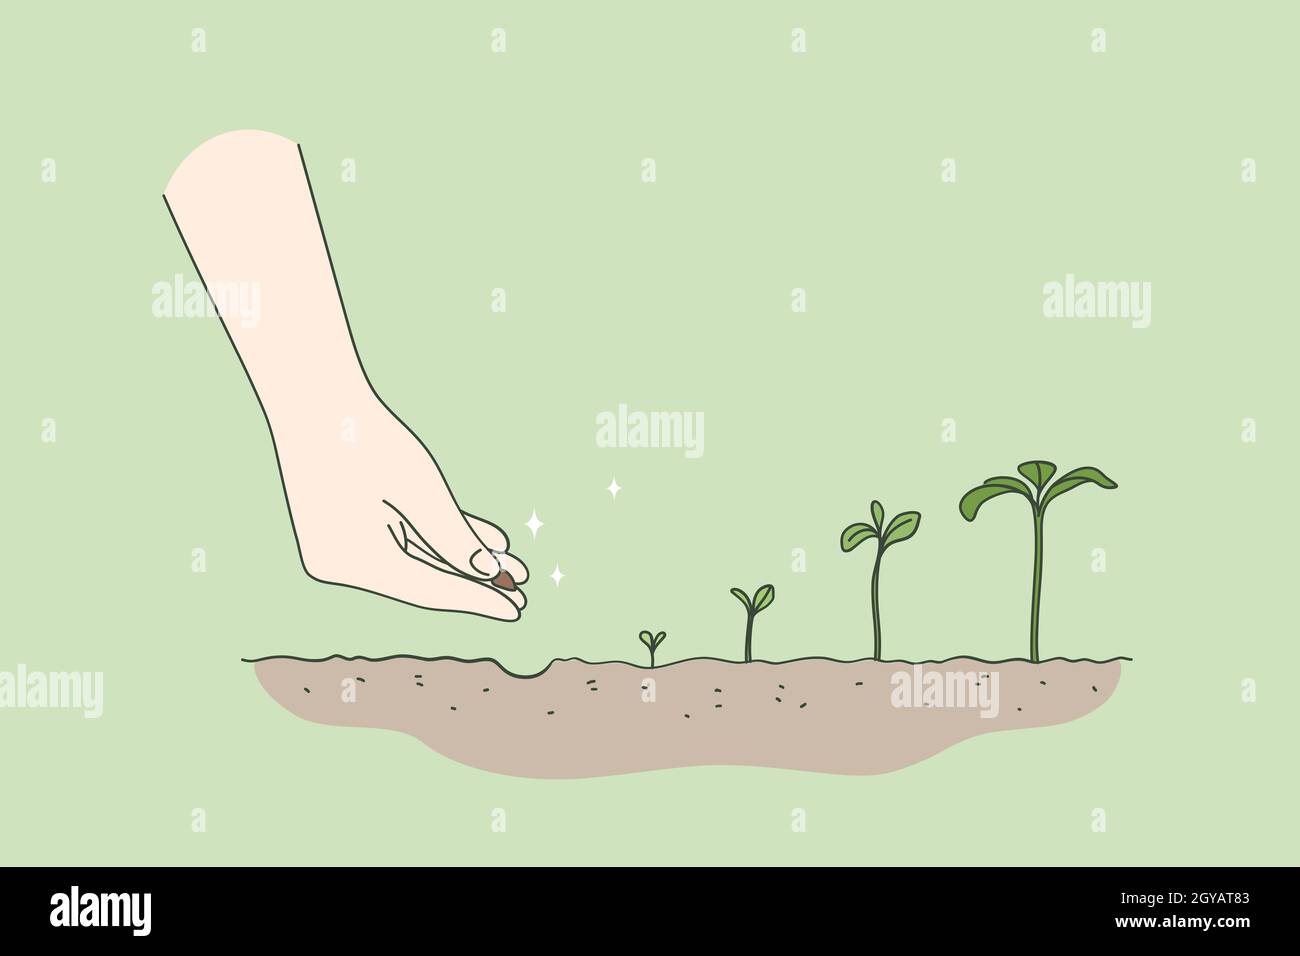 Agriculture, environment, new life concept. Human hand planting seed germination sequence starting new life beginning over green background vector ill Stock Photo